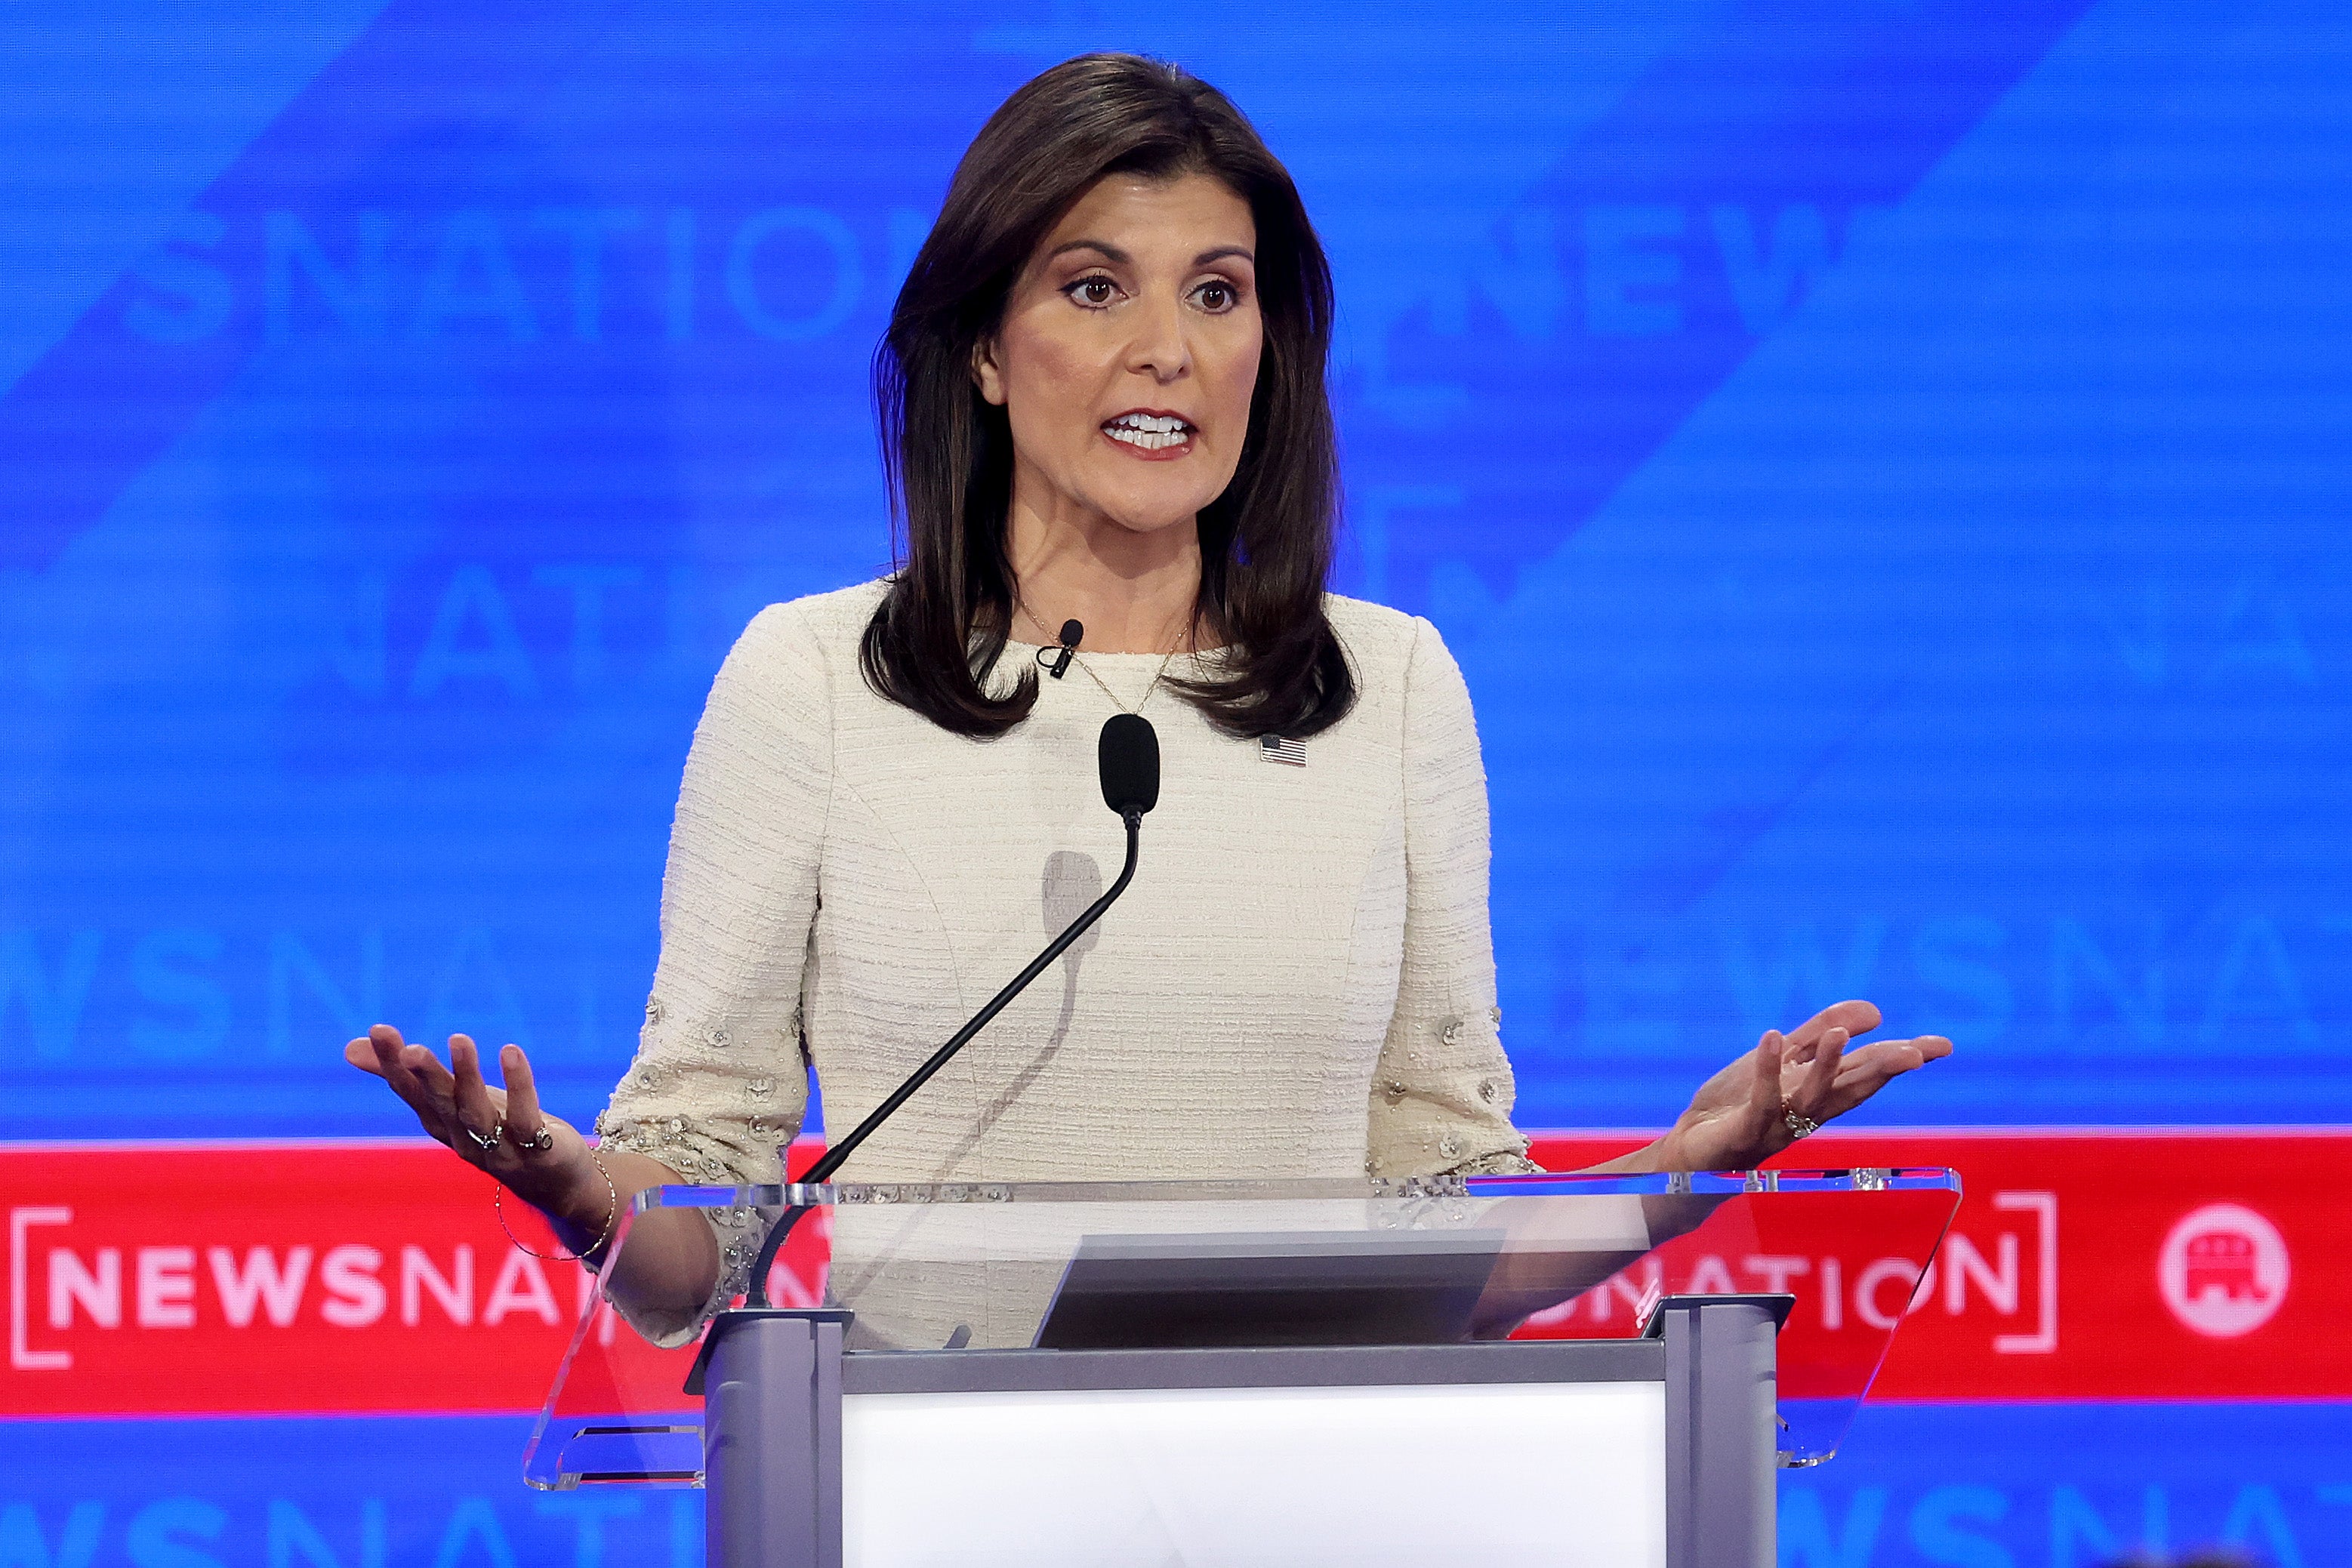 Nikki Haley faced criticism for ties to corporate world during GOP debate